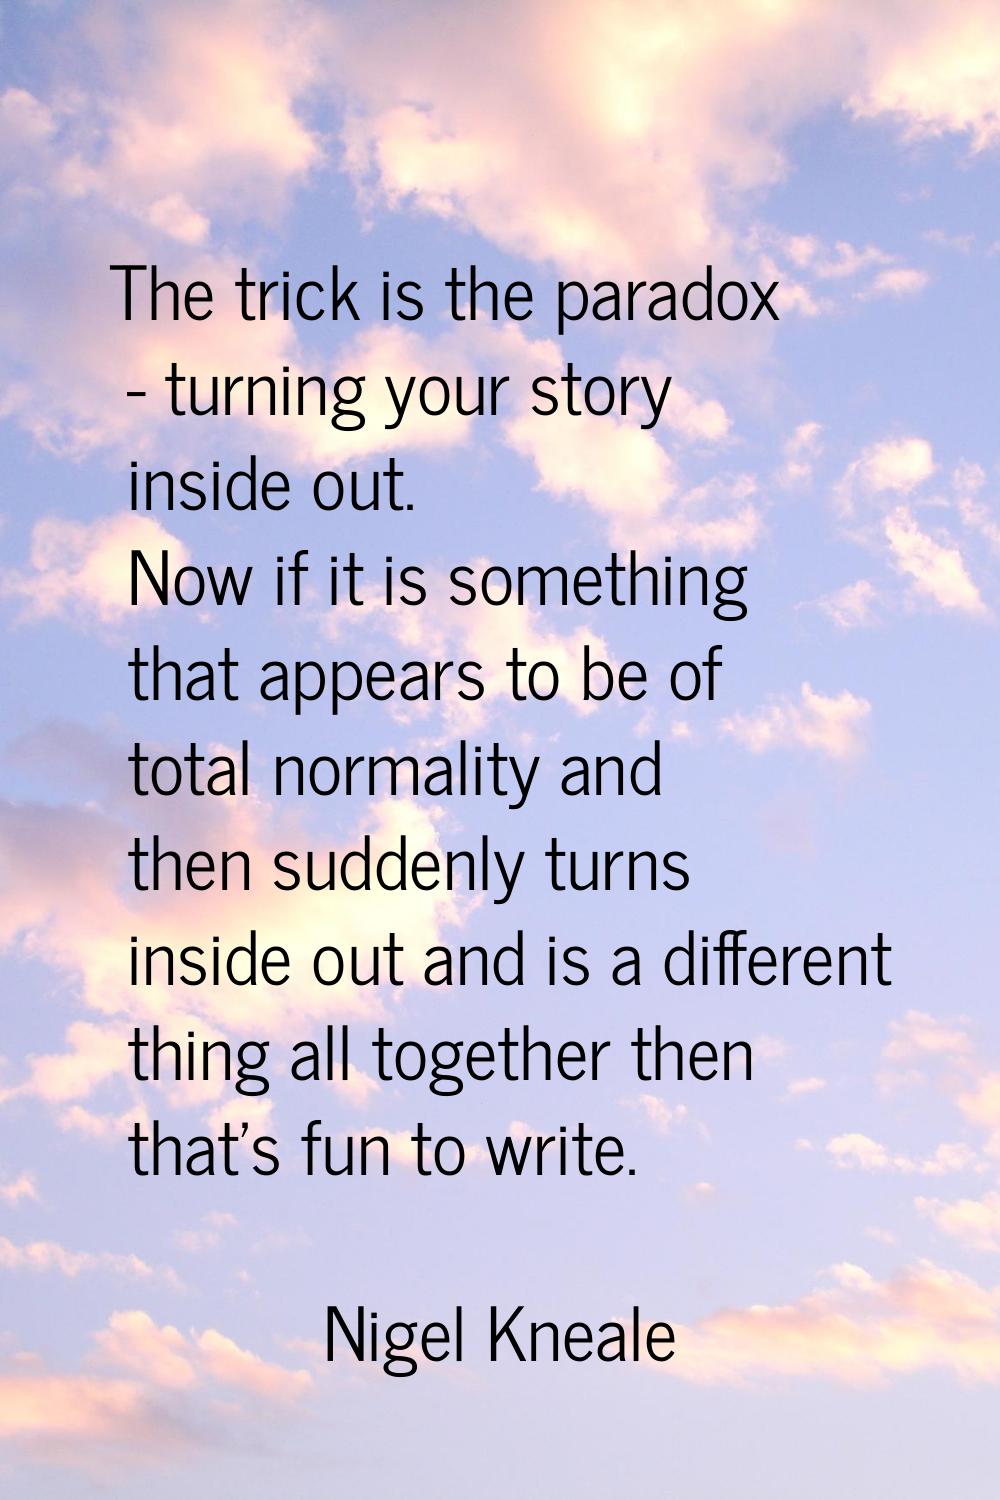 The trick is the paradox - turning your story inside out. Now if it is something that appears to be